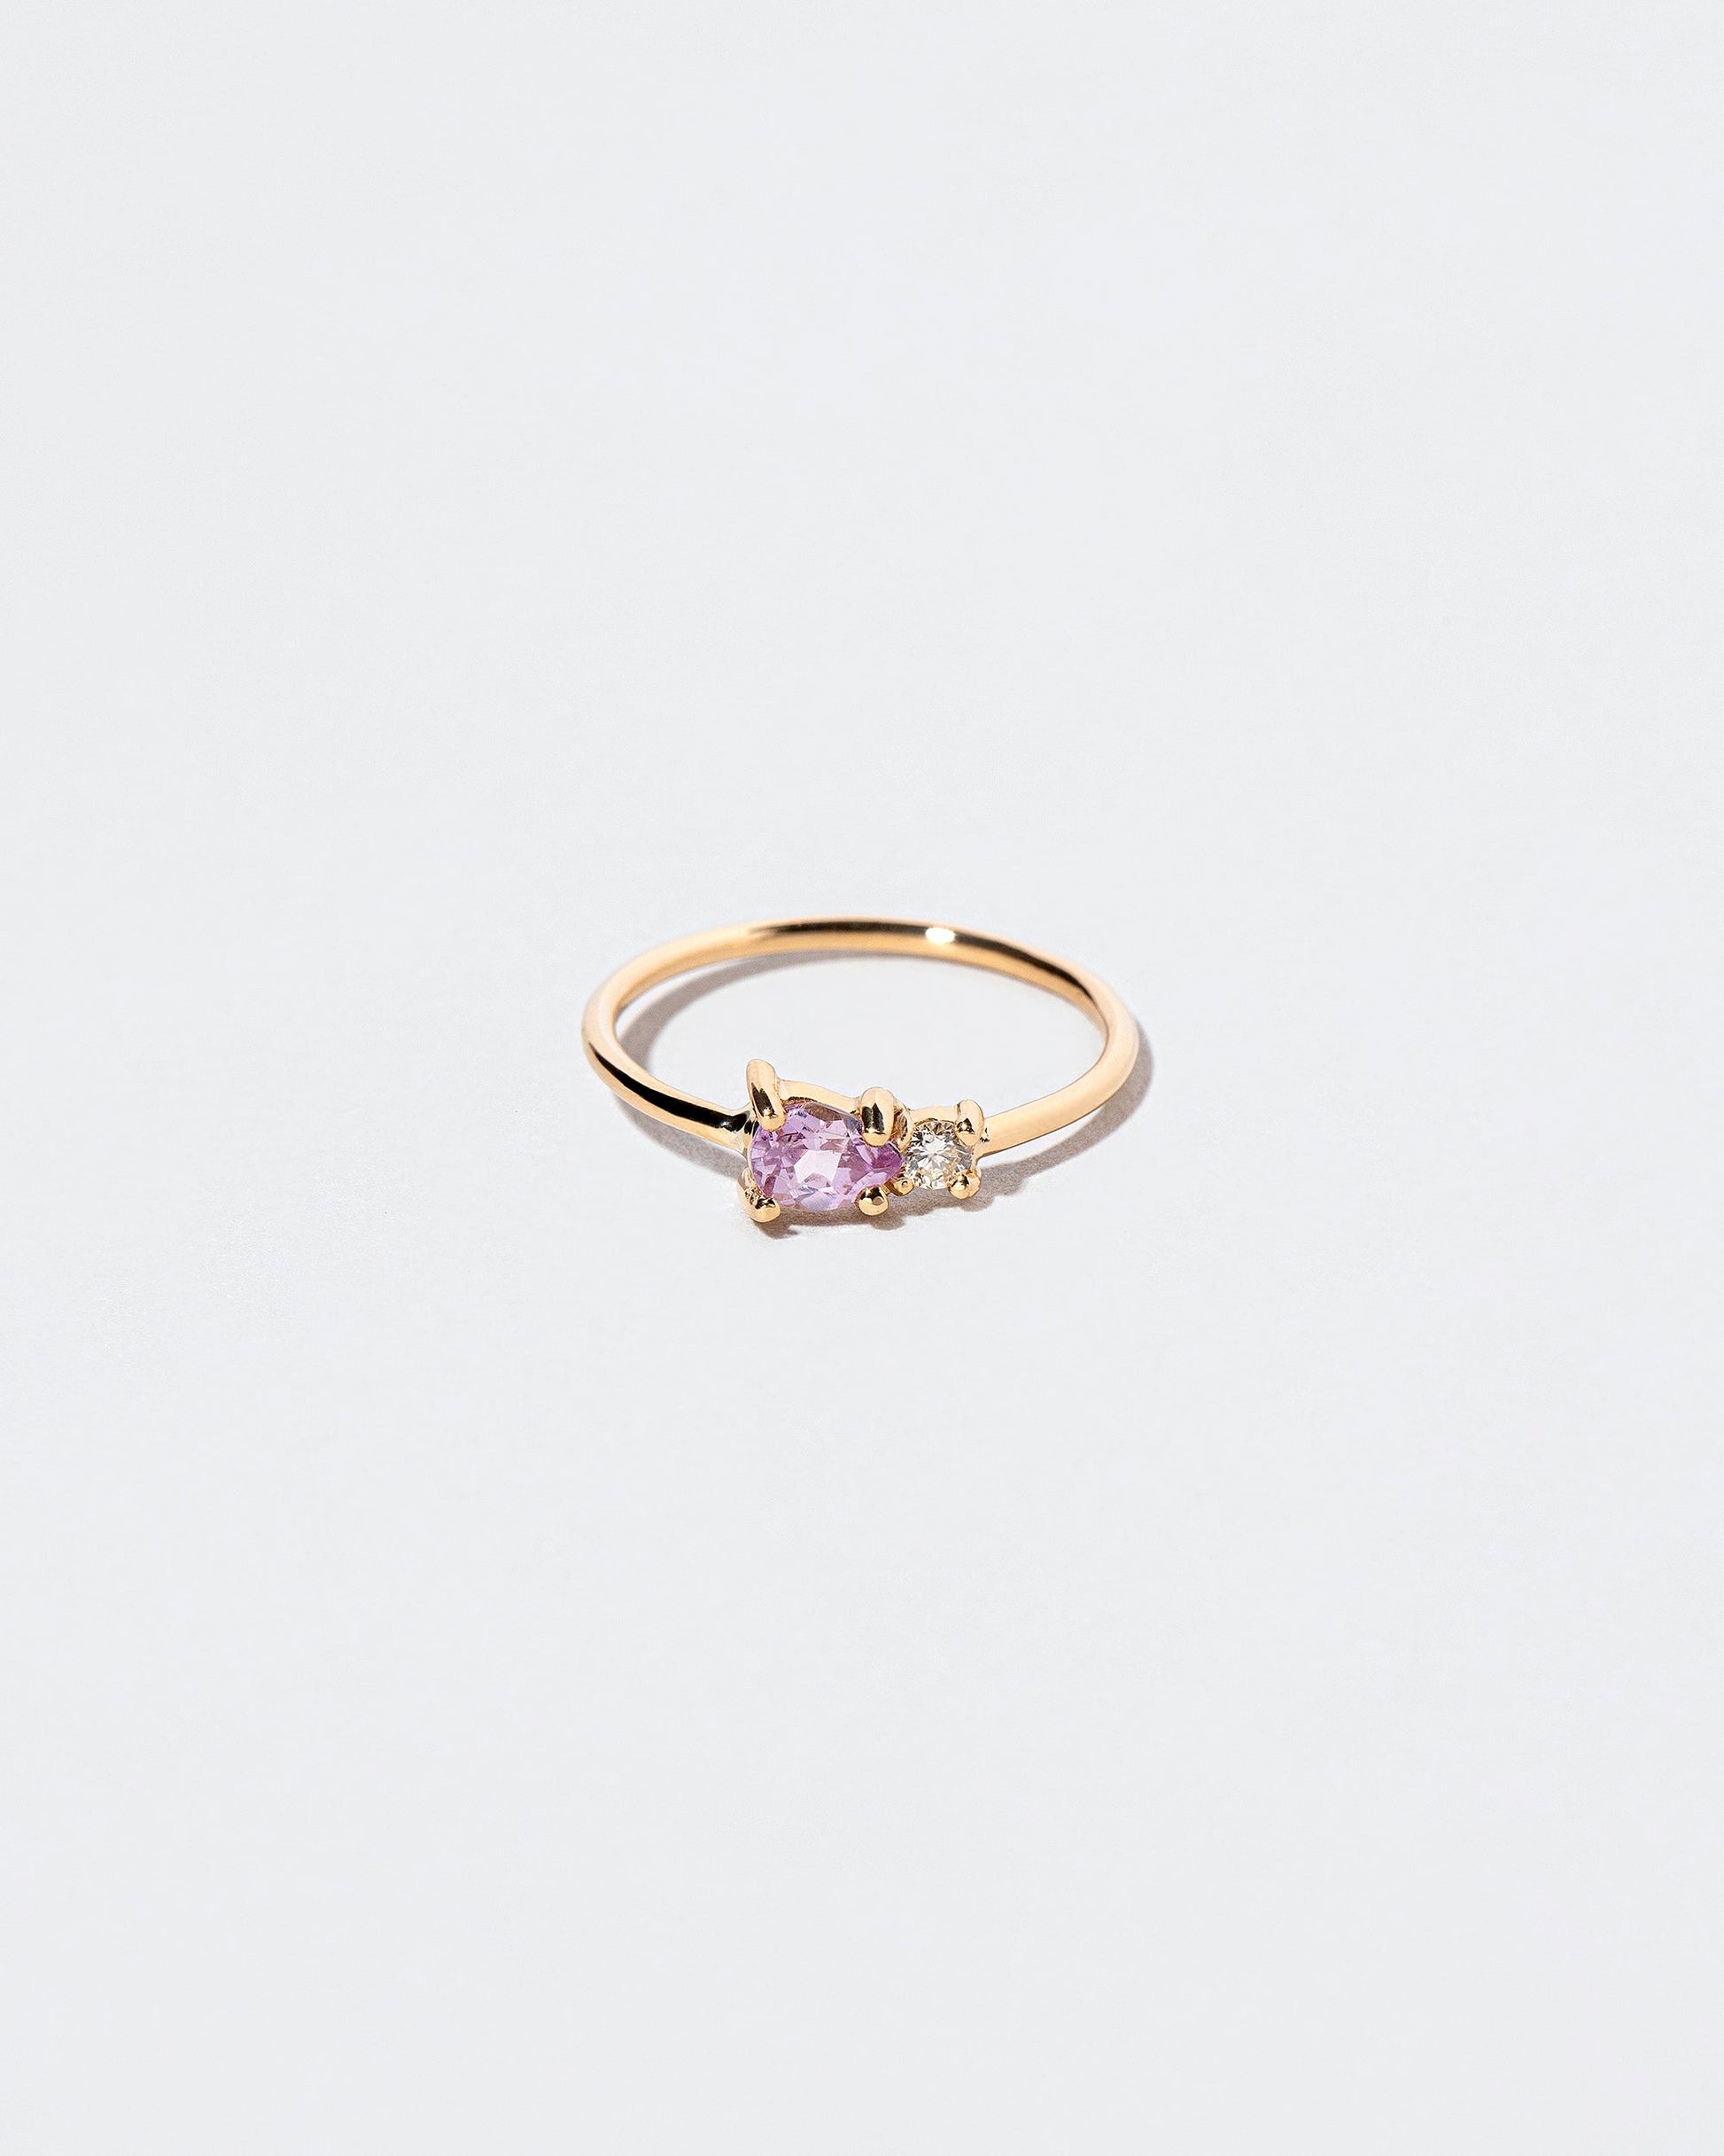  Teardrop Ring - Pink Sapphire on light color background.